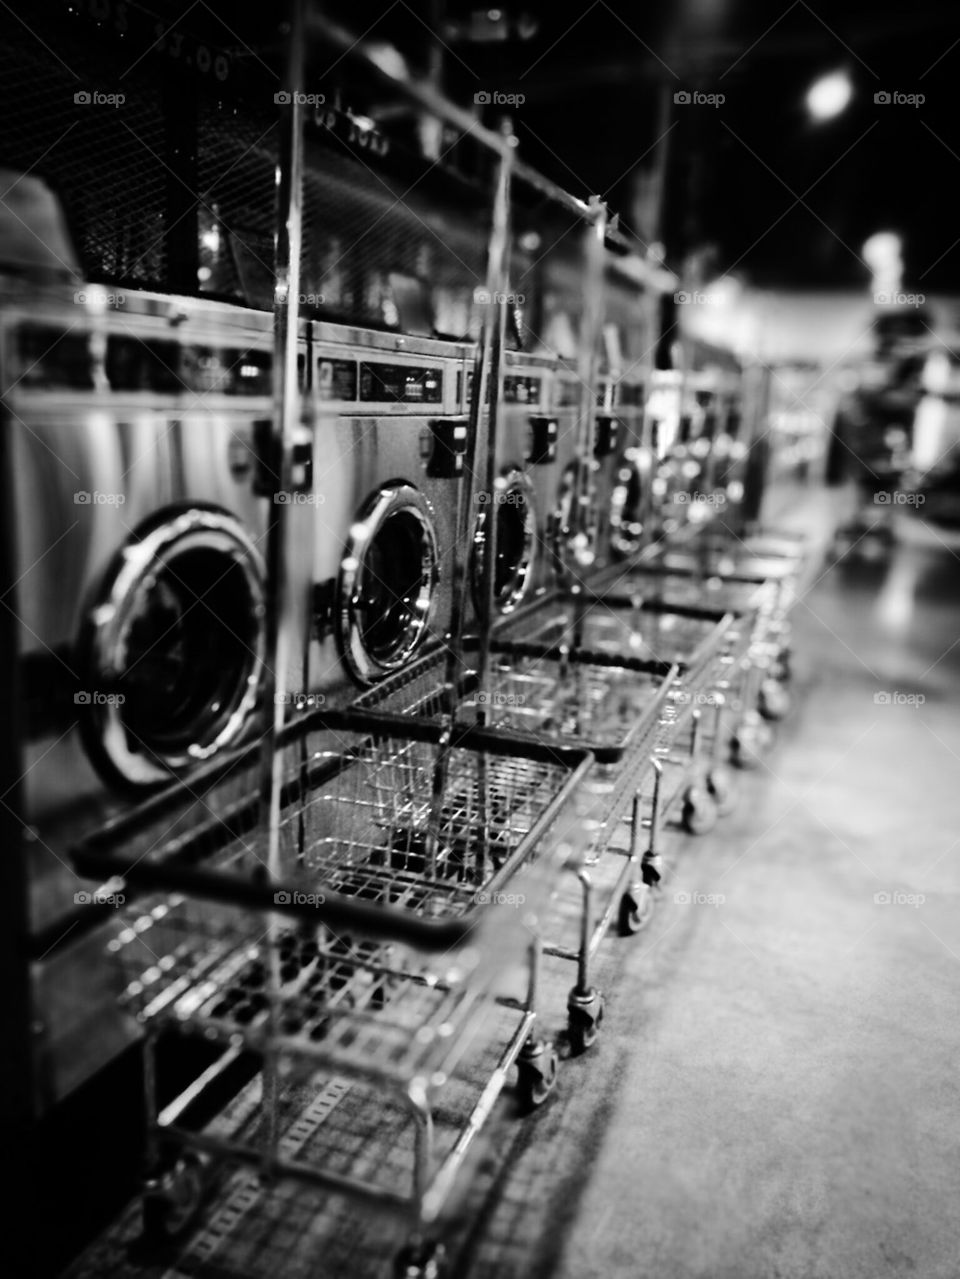 dryers and baskets